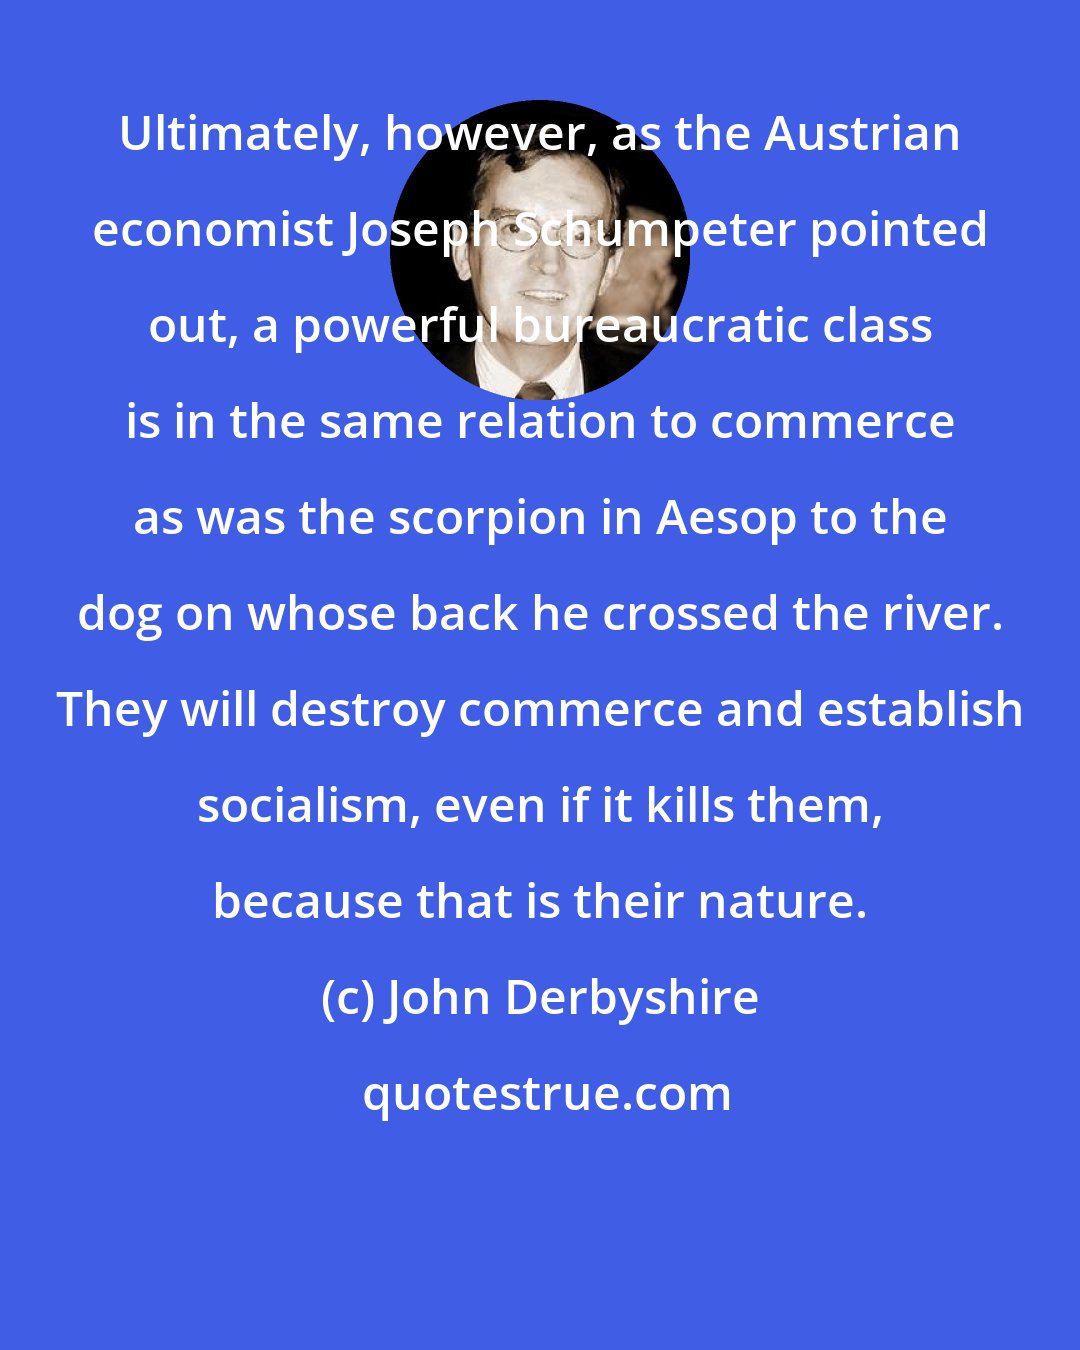 John Derbyshire: Ultimately, however, as the Austrian economist Joseph Schumpeter pointed out, a powerful bureaucratic class is in the same relation to commerce as was the scorpion in Aesop to the dog on whose back he crossed the river. They will destroy commerce and establish socialism, even if it kills them, because that is their nature.